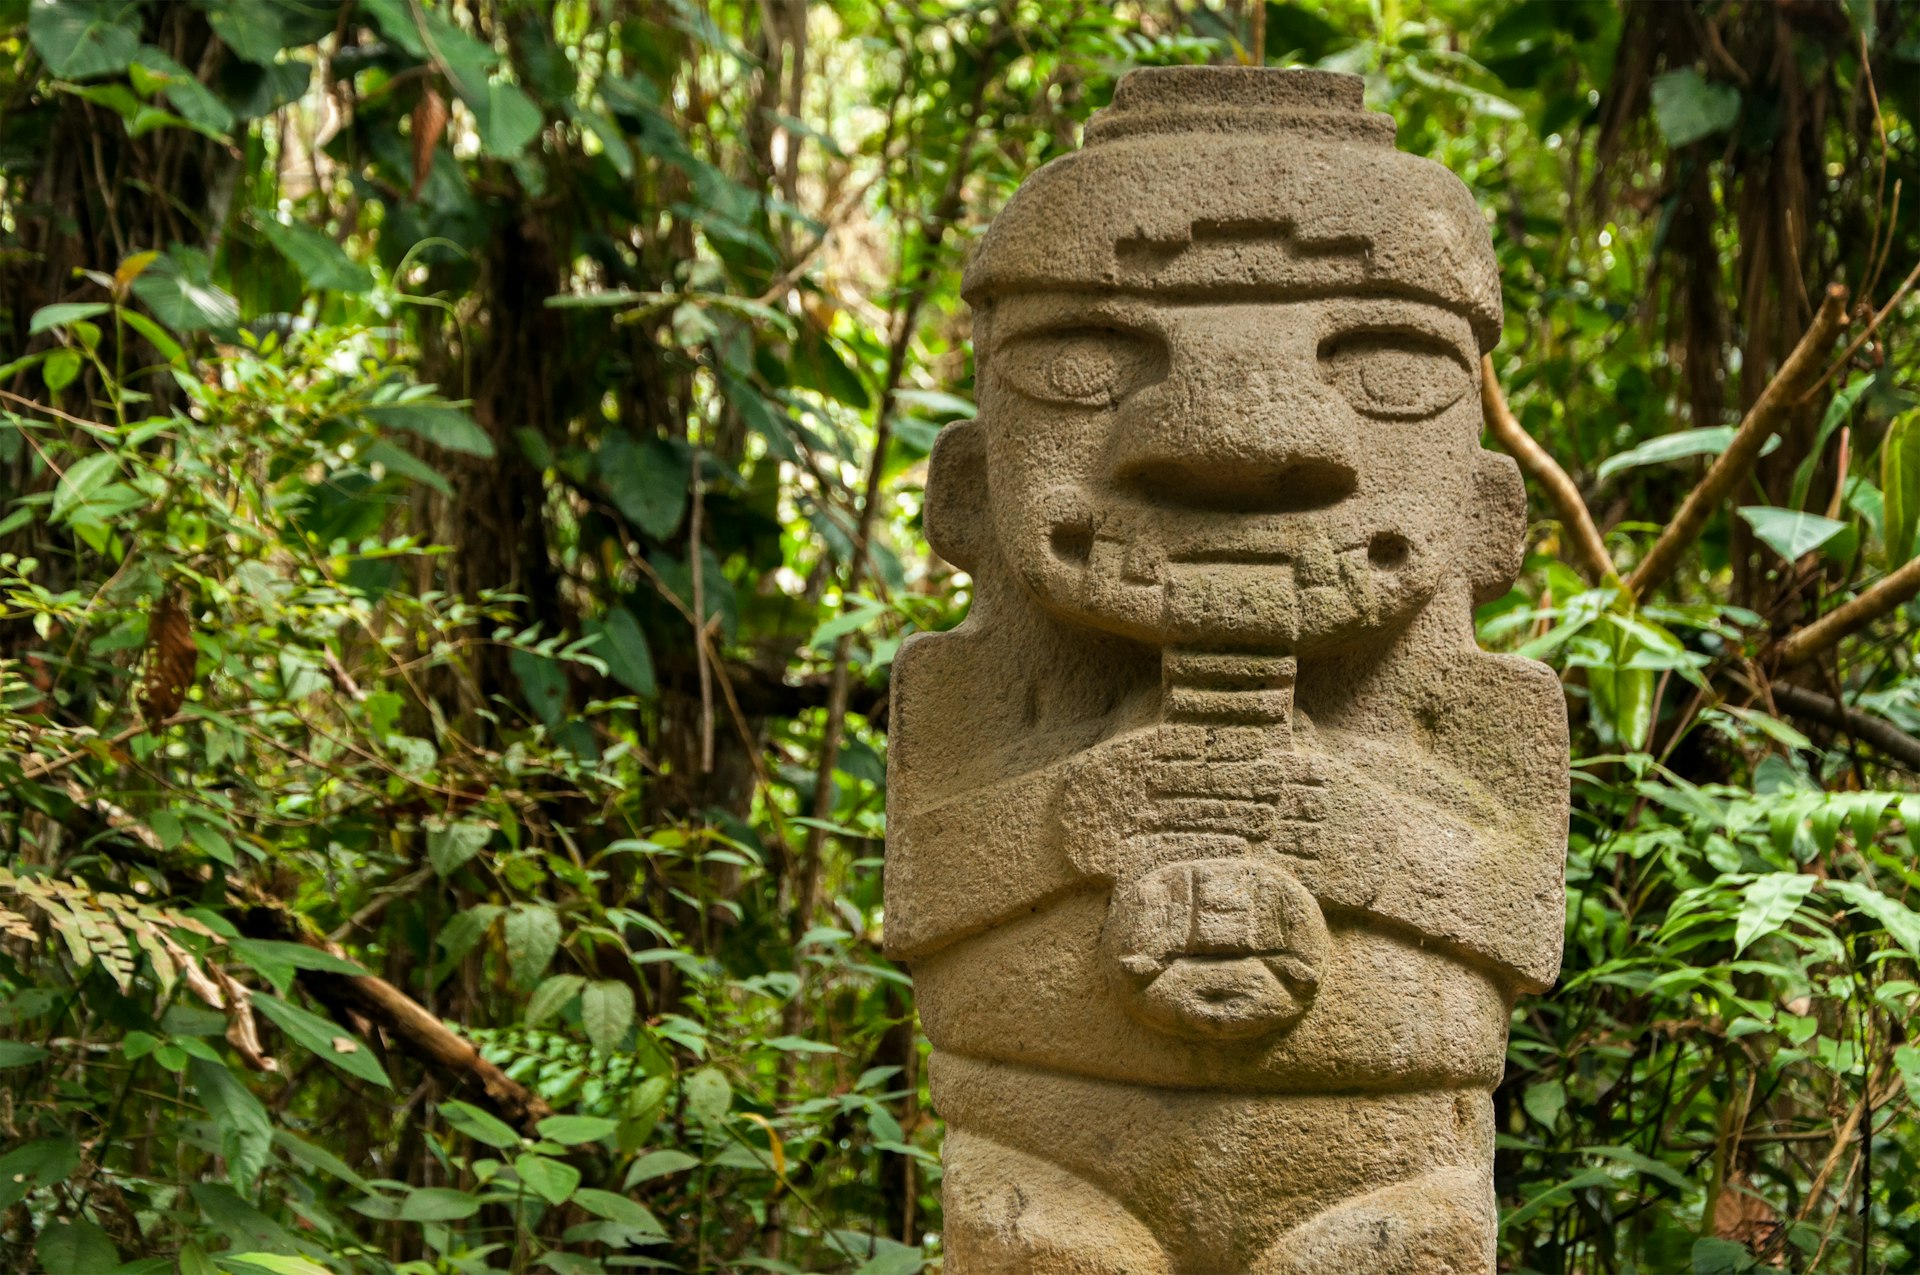 A pre-Columbian stone figure of a flute-playing person at Parque Arqueológico San Agustín, Colombia